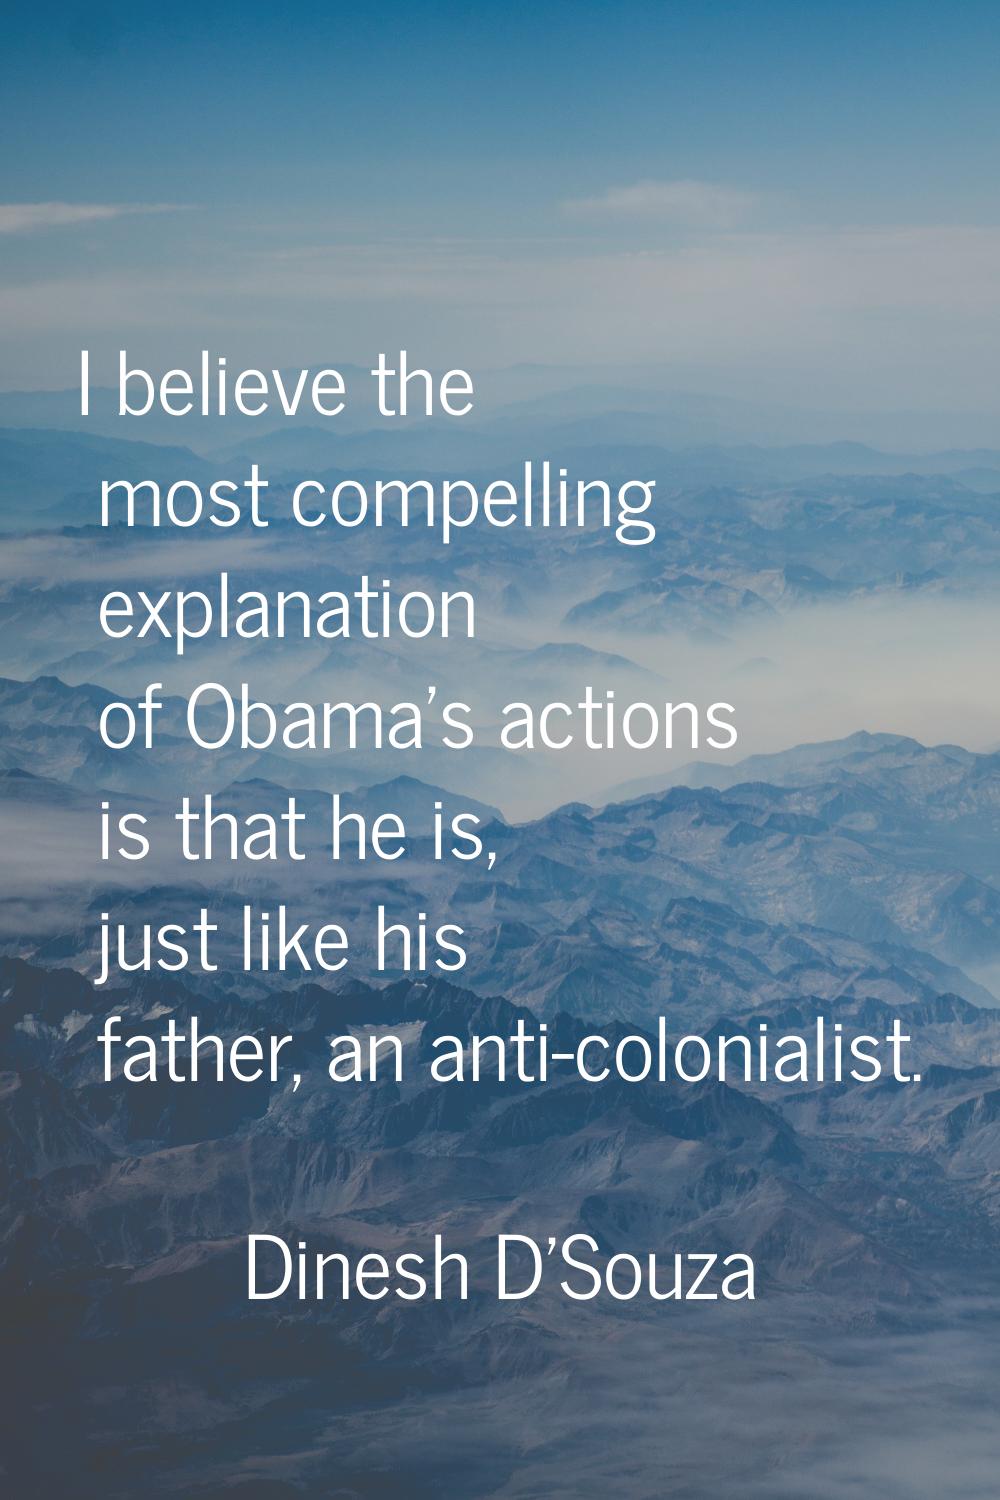 I believe the most compelling explanation of Obama's actions is that he is, just like his father, a